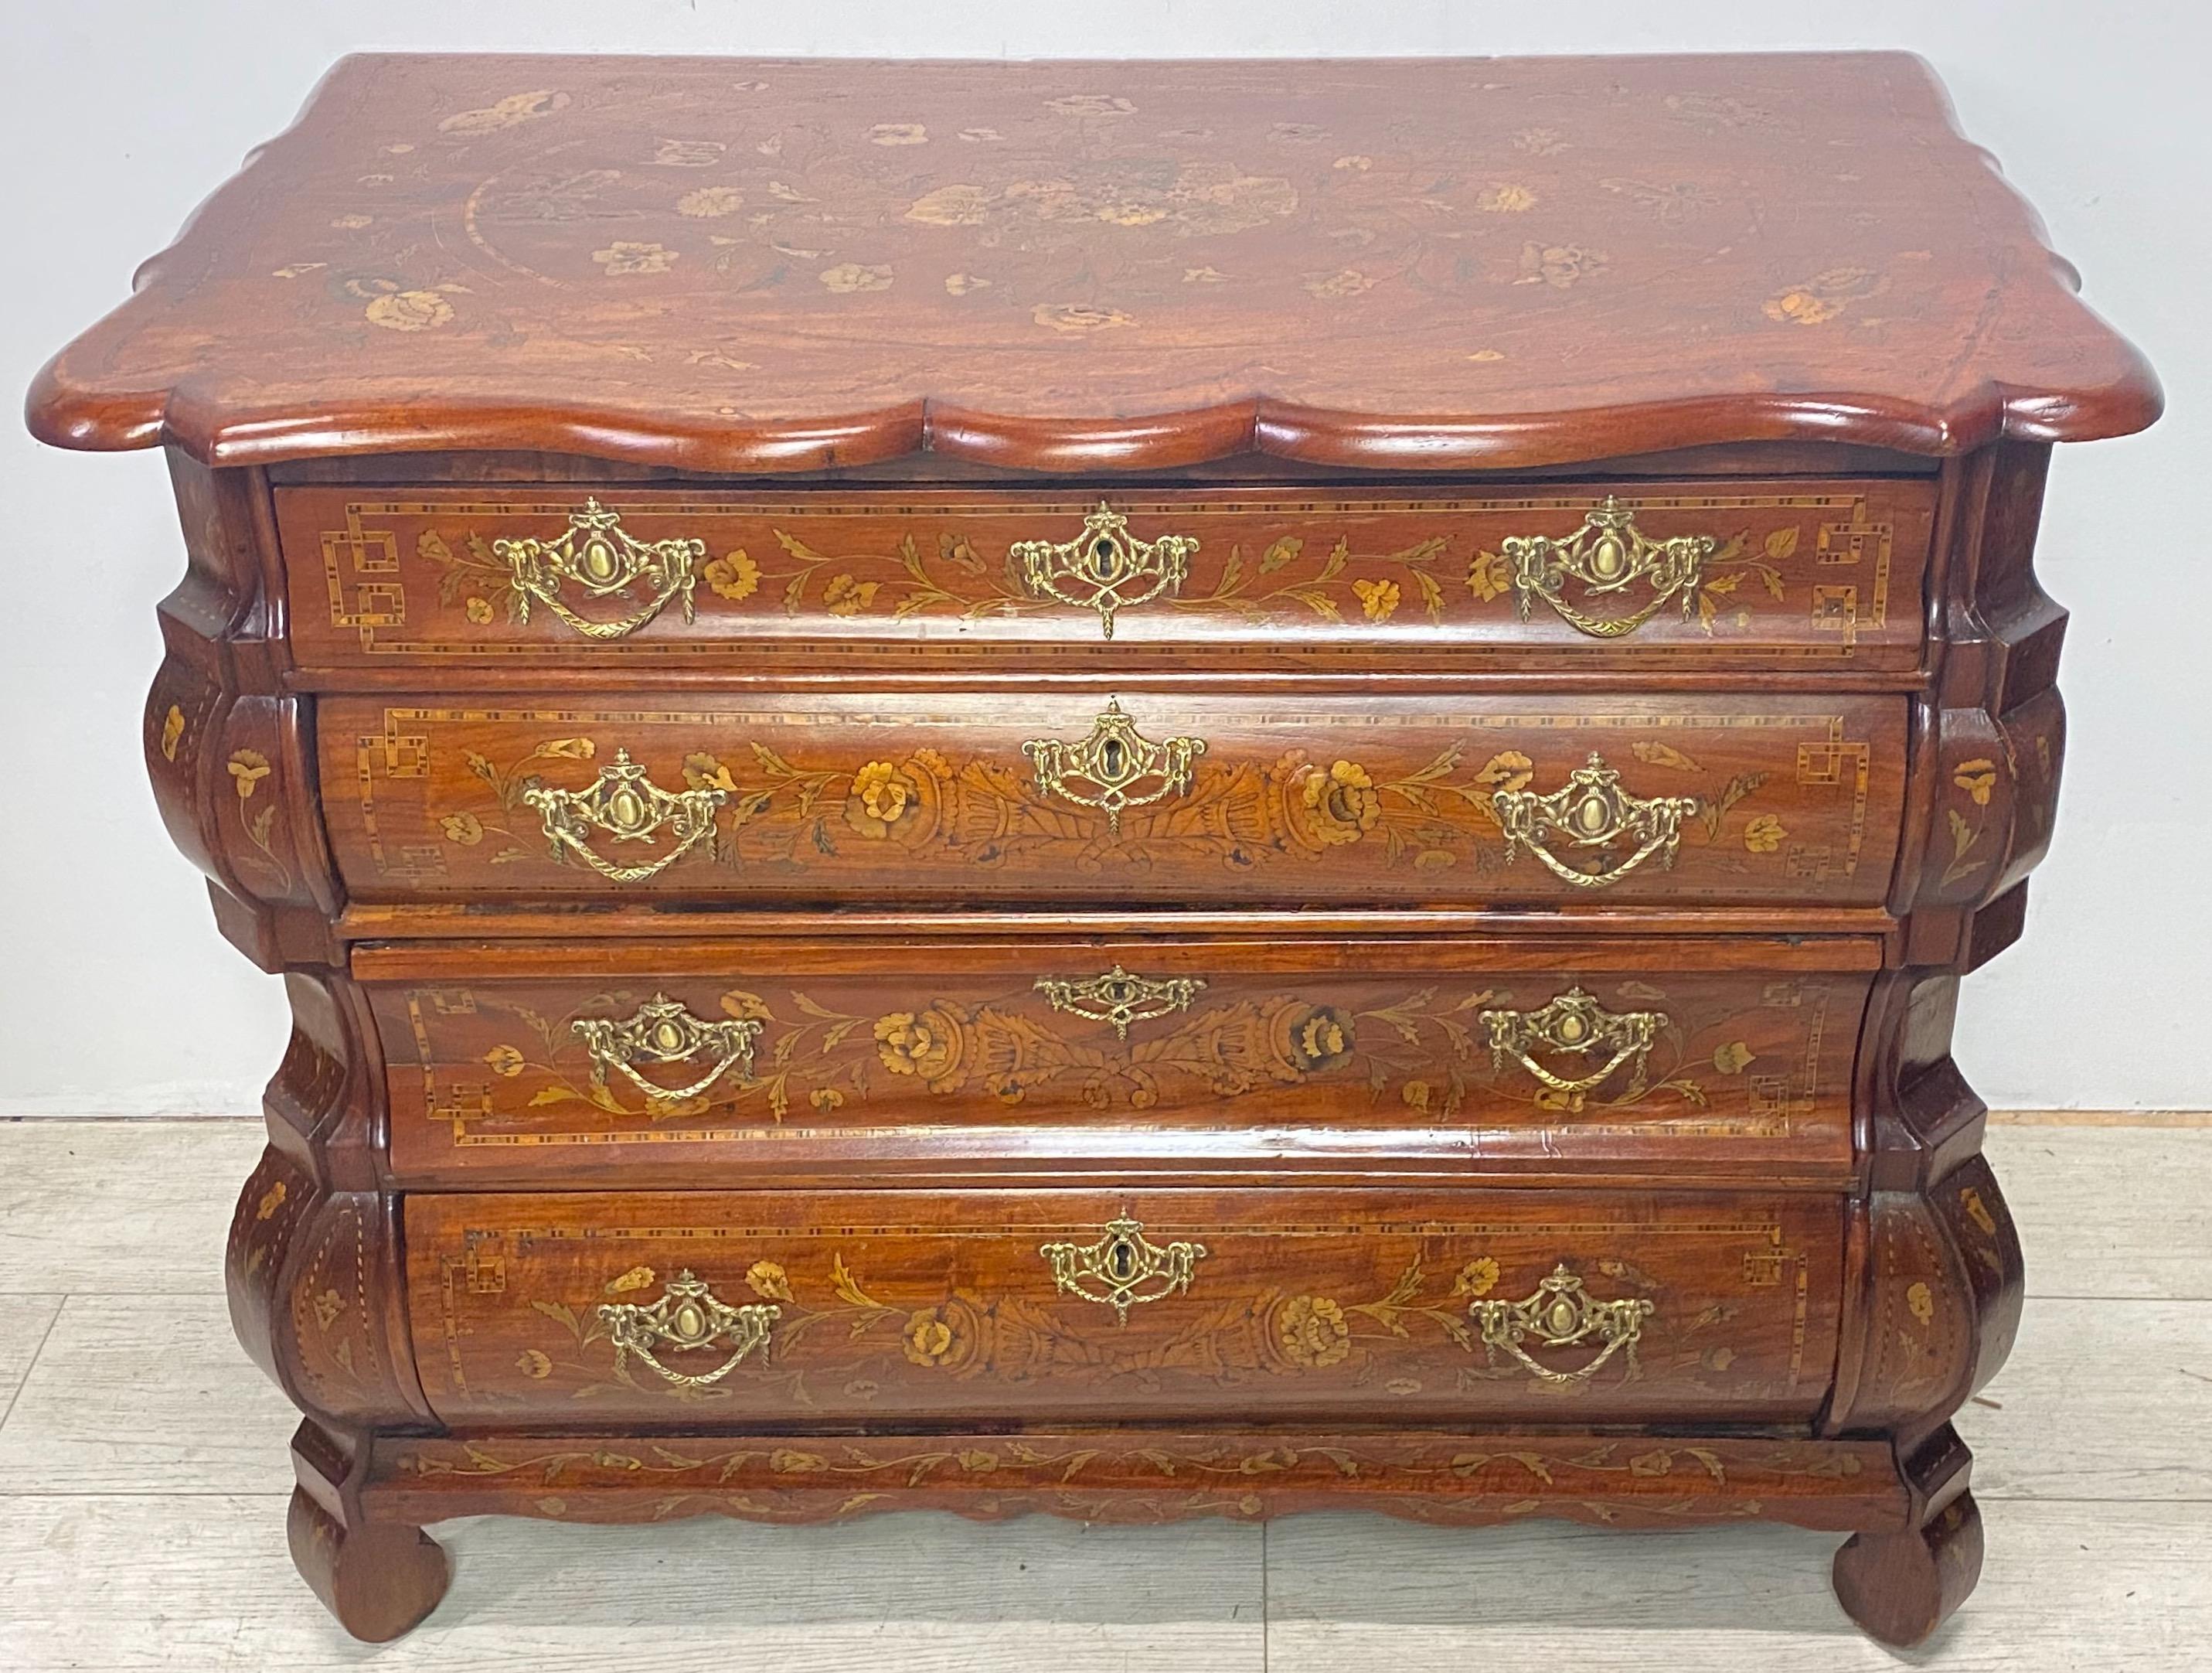 Curvaceous four drawer Dutch commode with satinwood and fruitwood inlaid foliate motif, most showing the original hand tinted green leaves.
Beautifully constructed in walnut veneer over solid oak, with an excellent color and patination. 
18th